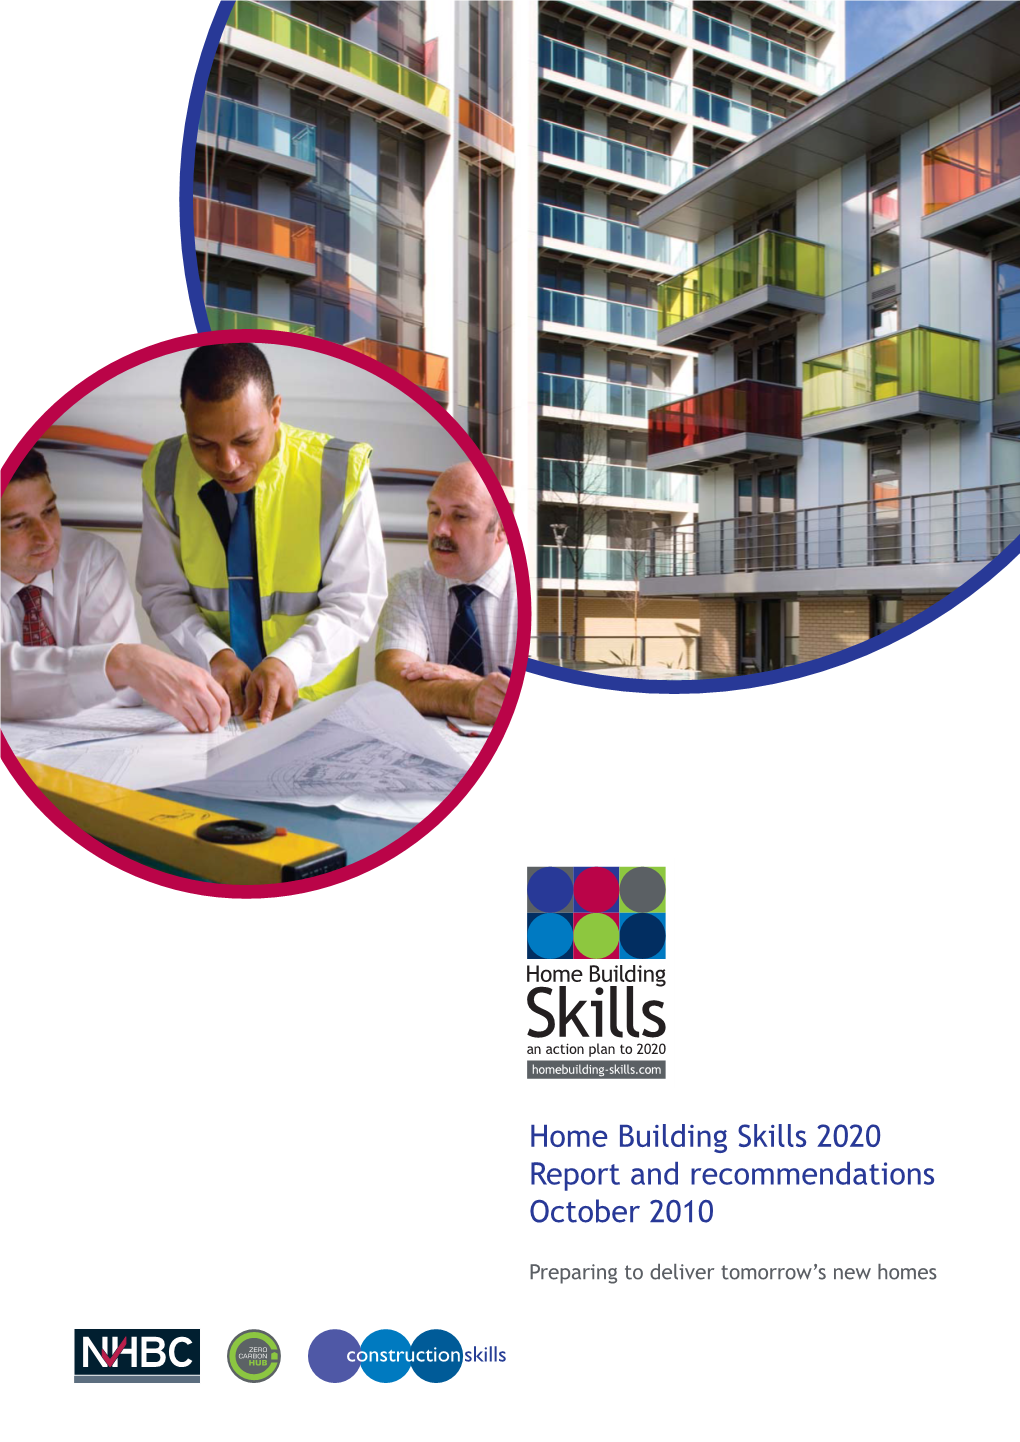 Home Building Skills 2020 Report and Recommendations October 2010